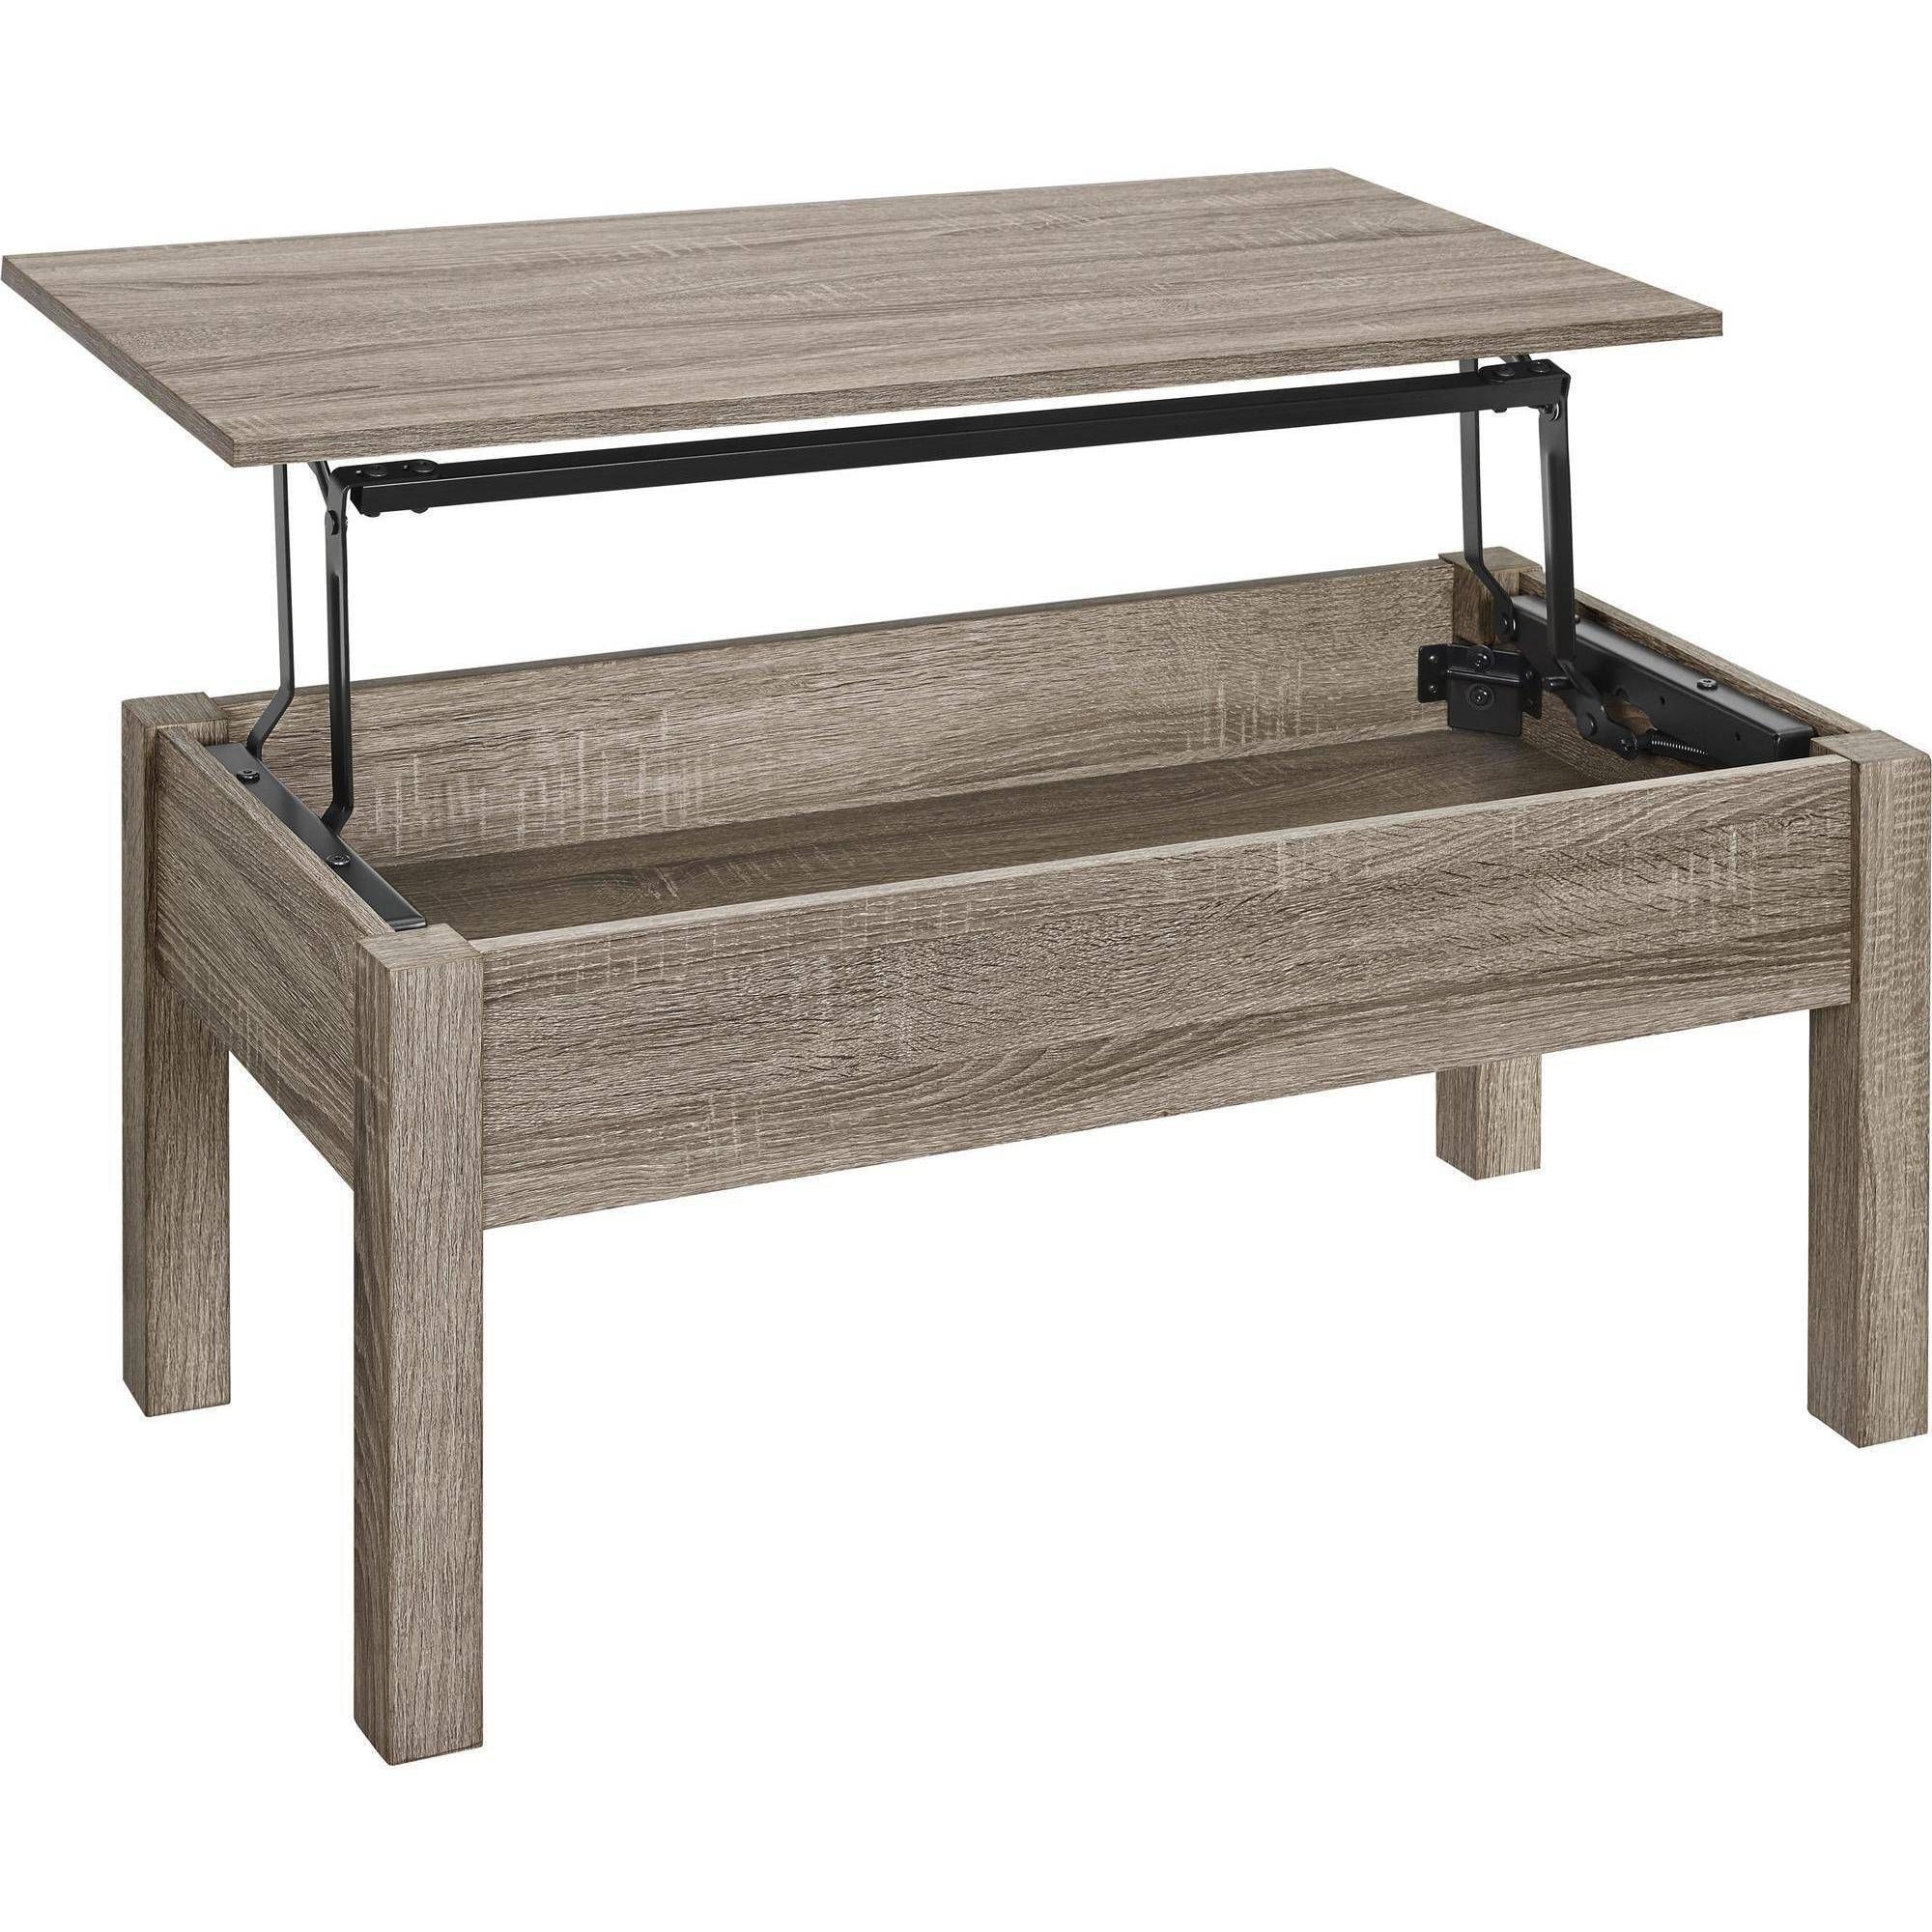 Mainstays Lift Top Coffee Table, Multiple Colors – Walmart For Lift Top Coffee Table Furniture (View 6 of 30)